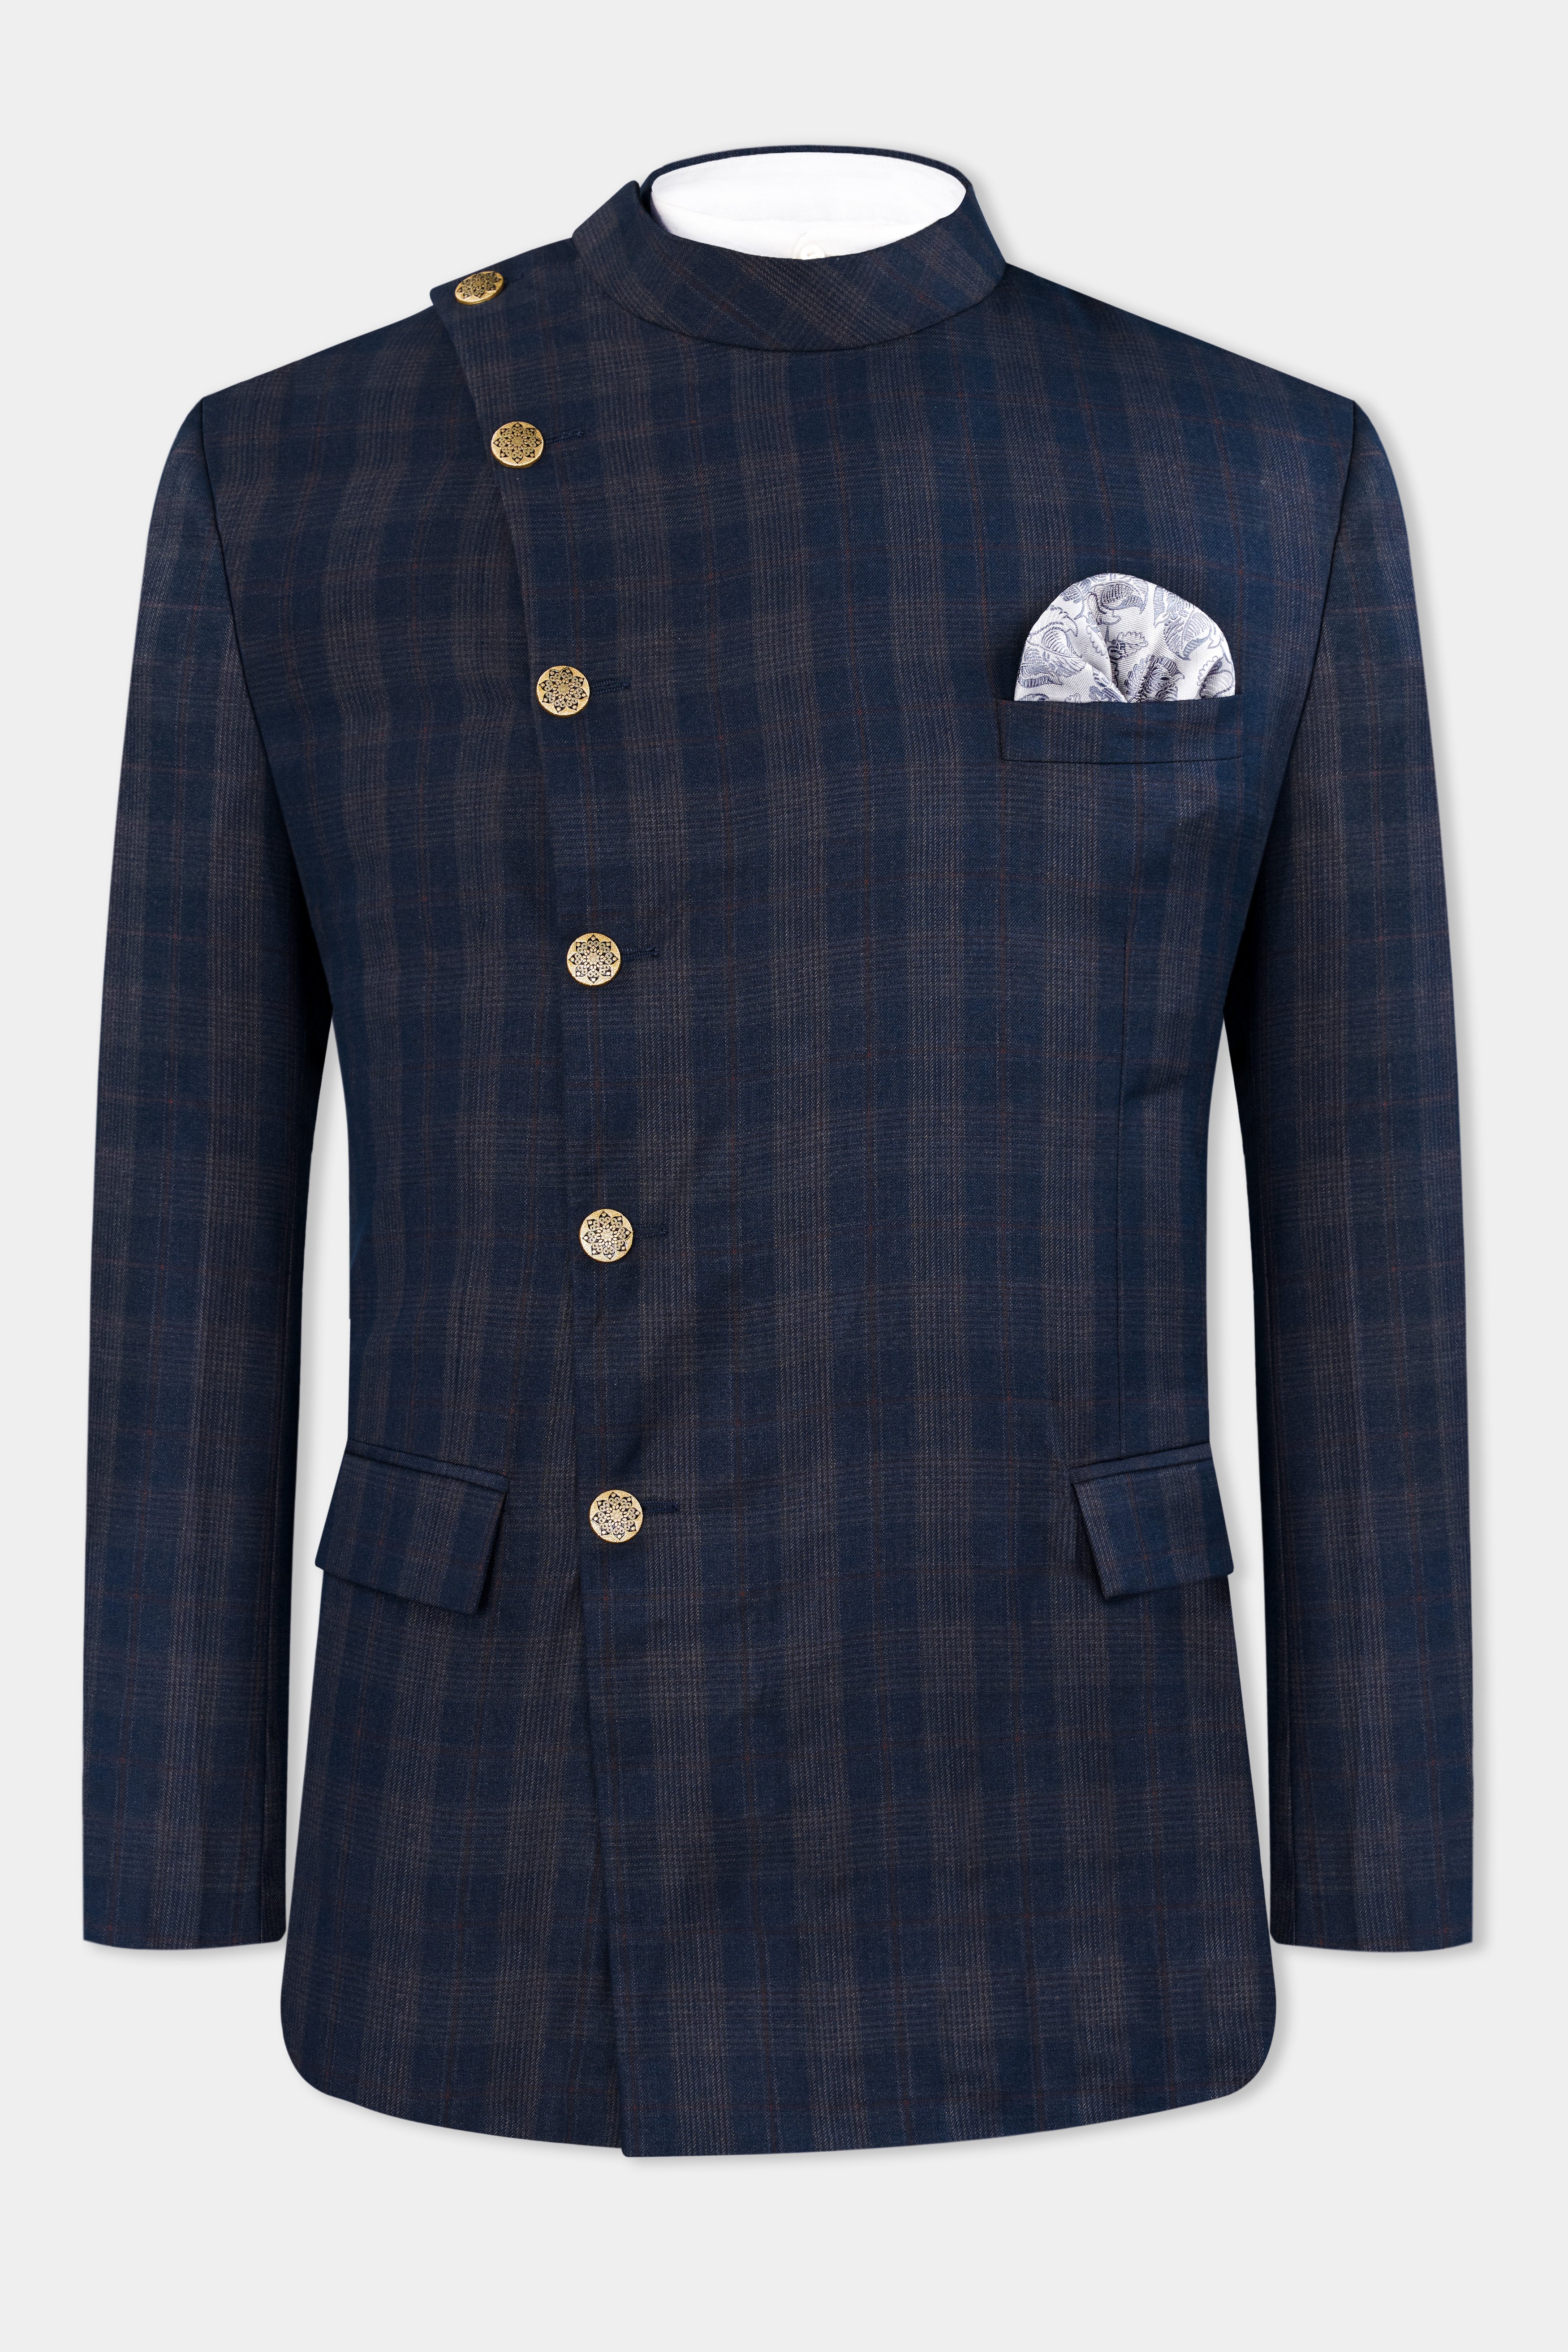 Admiral Blue and Cinereous Brown Plaid Wool Rich Cross Buttoned Bandhgala Suit ST2872-CBG2-36,ST2872-CBG2-38,ST2872-CBG2-40,ST2872-CBG2-42,ST2872-CBG2-44,ST2872-CBG2-46,ST2872-CBG2-48,ST2872-CBG2-50,ST2872-CBG2-52,ST2872-CBG2-54,ST2872-CBG2-56,ST2872-CBG2-58,ST2872-CBG2-60